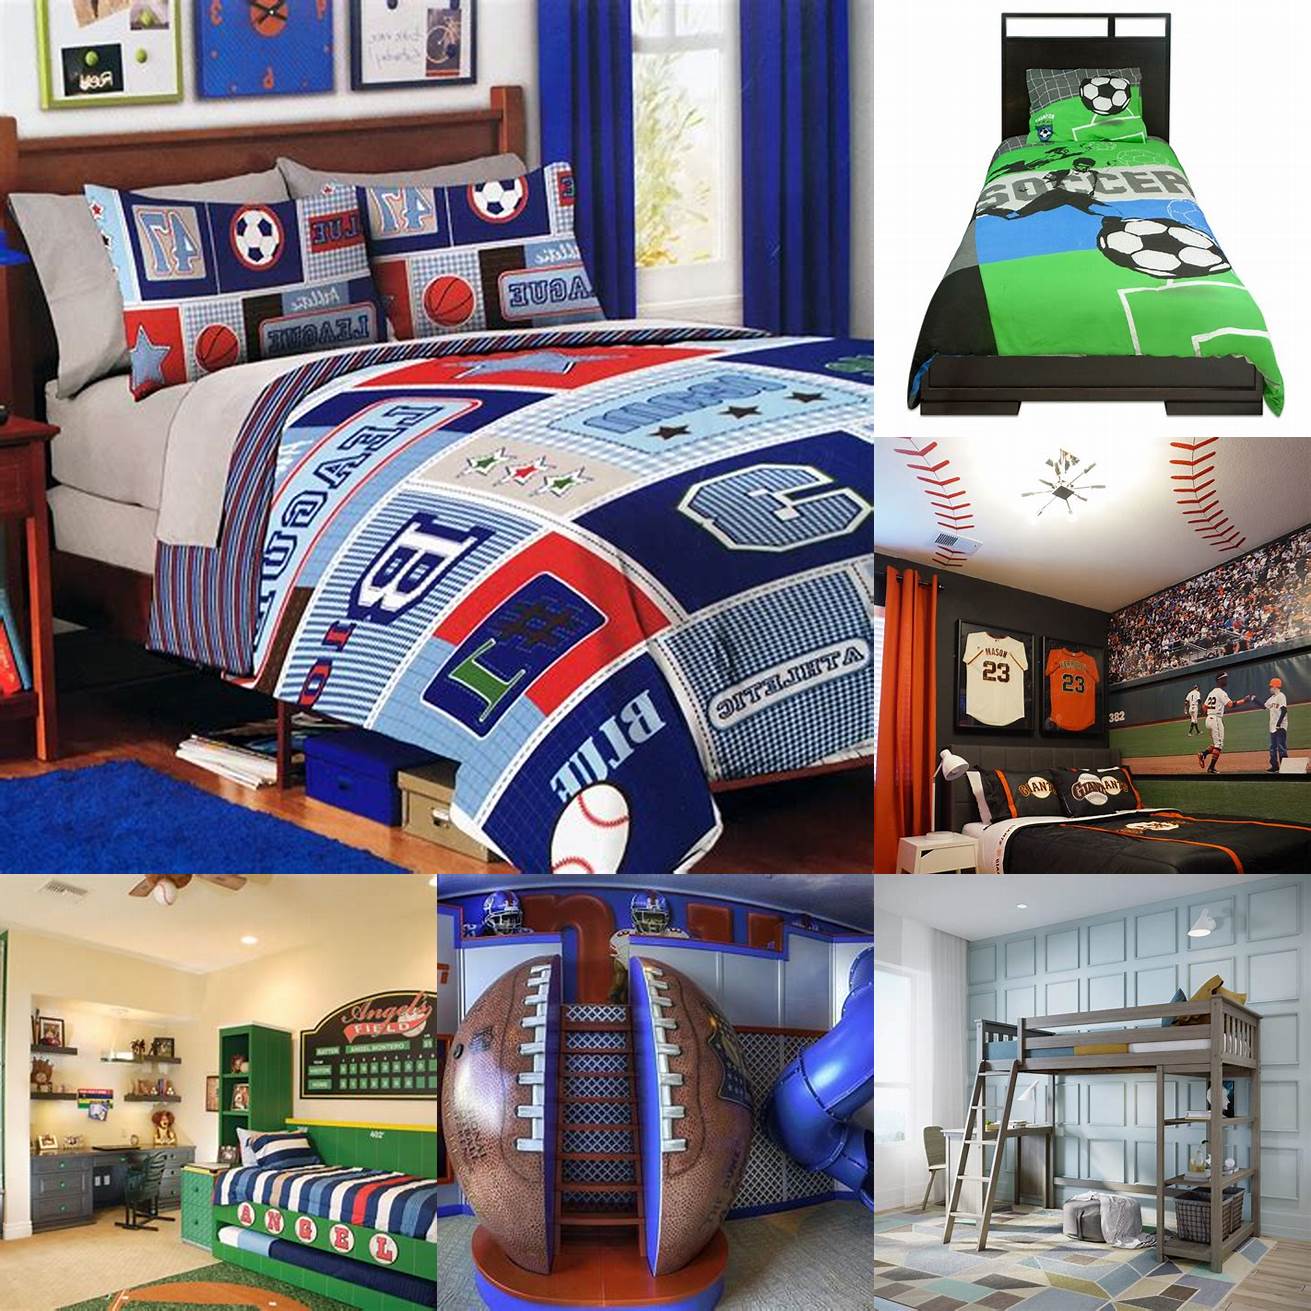 This sports-themed set includes a twin bed frame bookshelf and desk perfect for an active and athletic boy